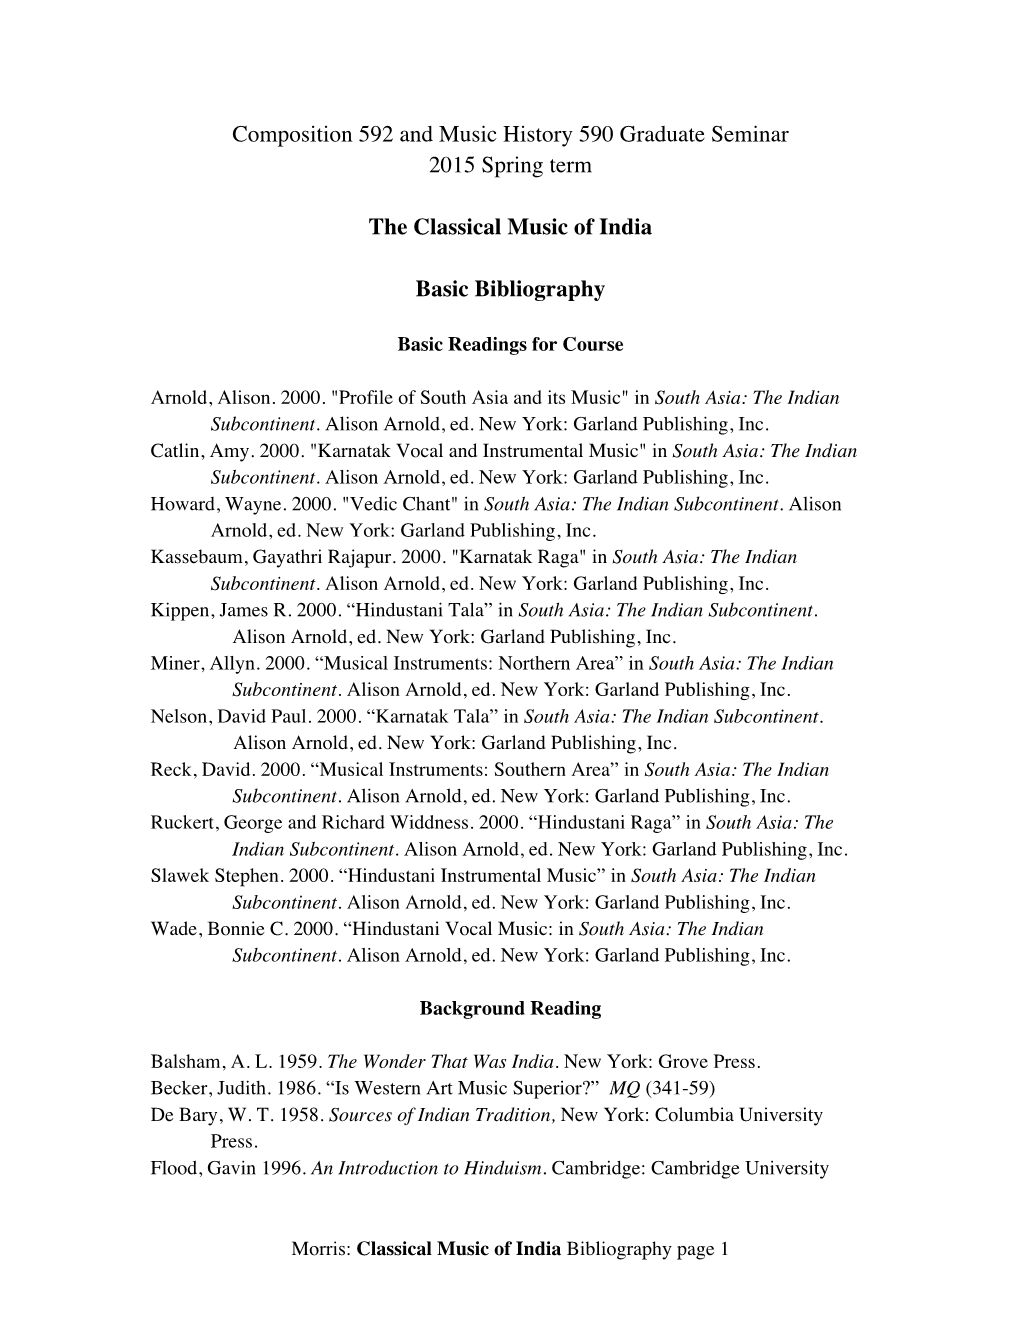 Composition 592 and Music History 590 Graduate Seminar 2015 Spring Term the Classical Music of India Basic Bibliography